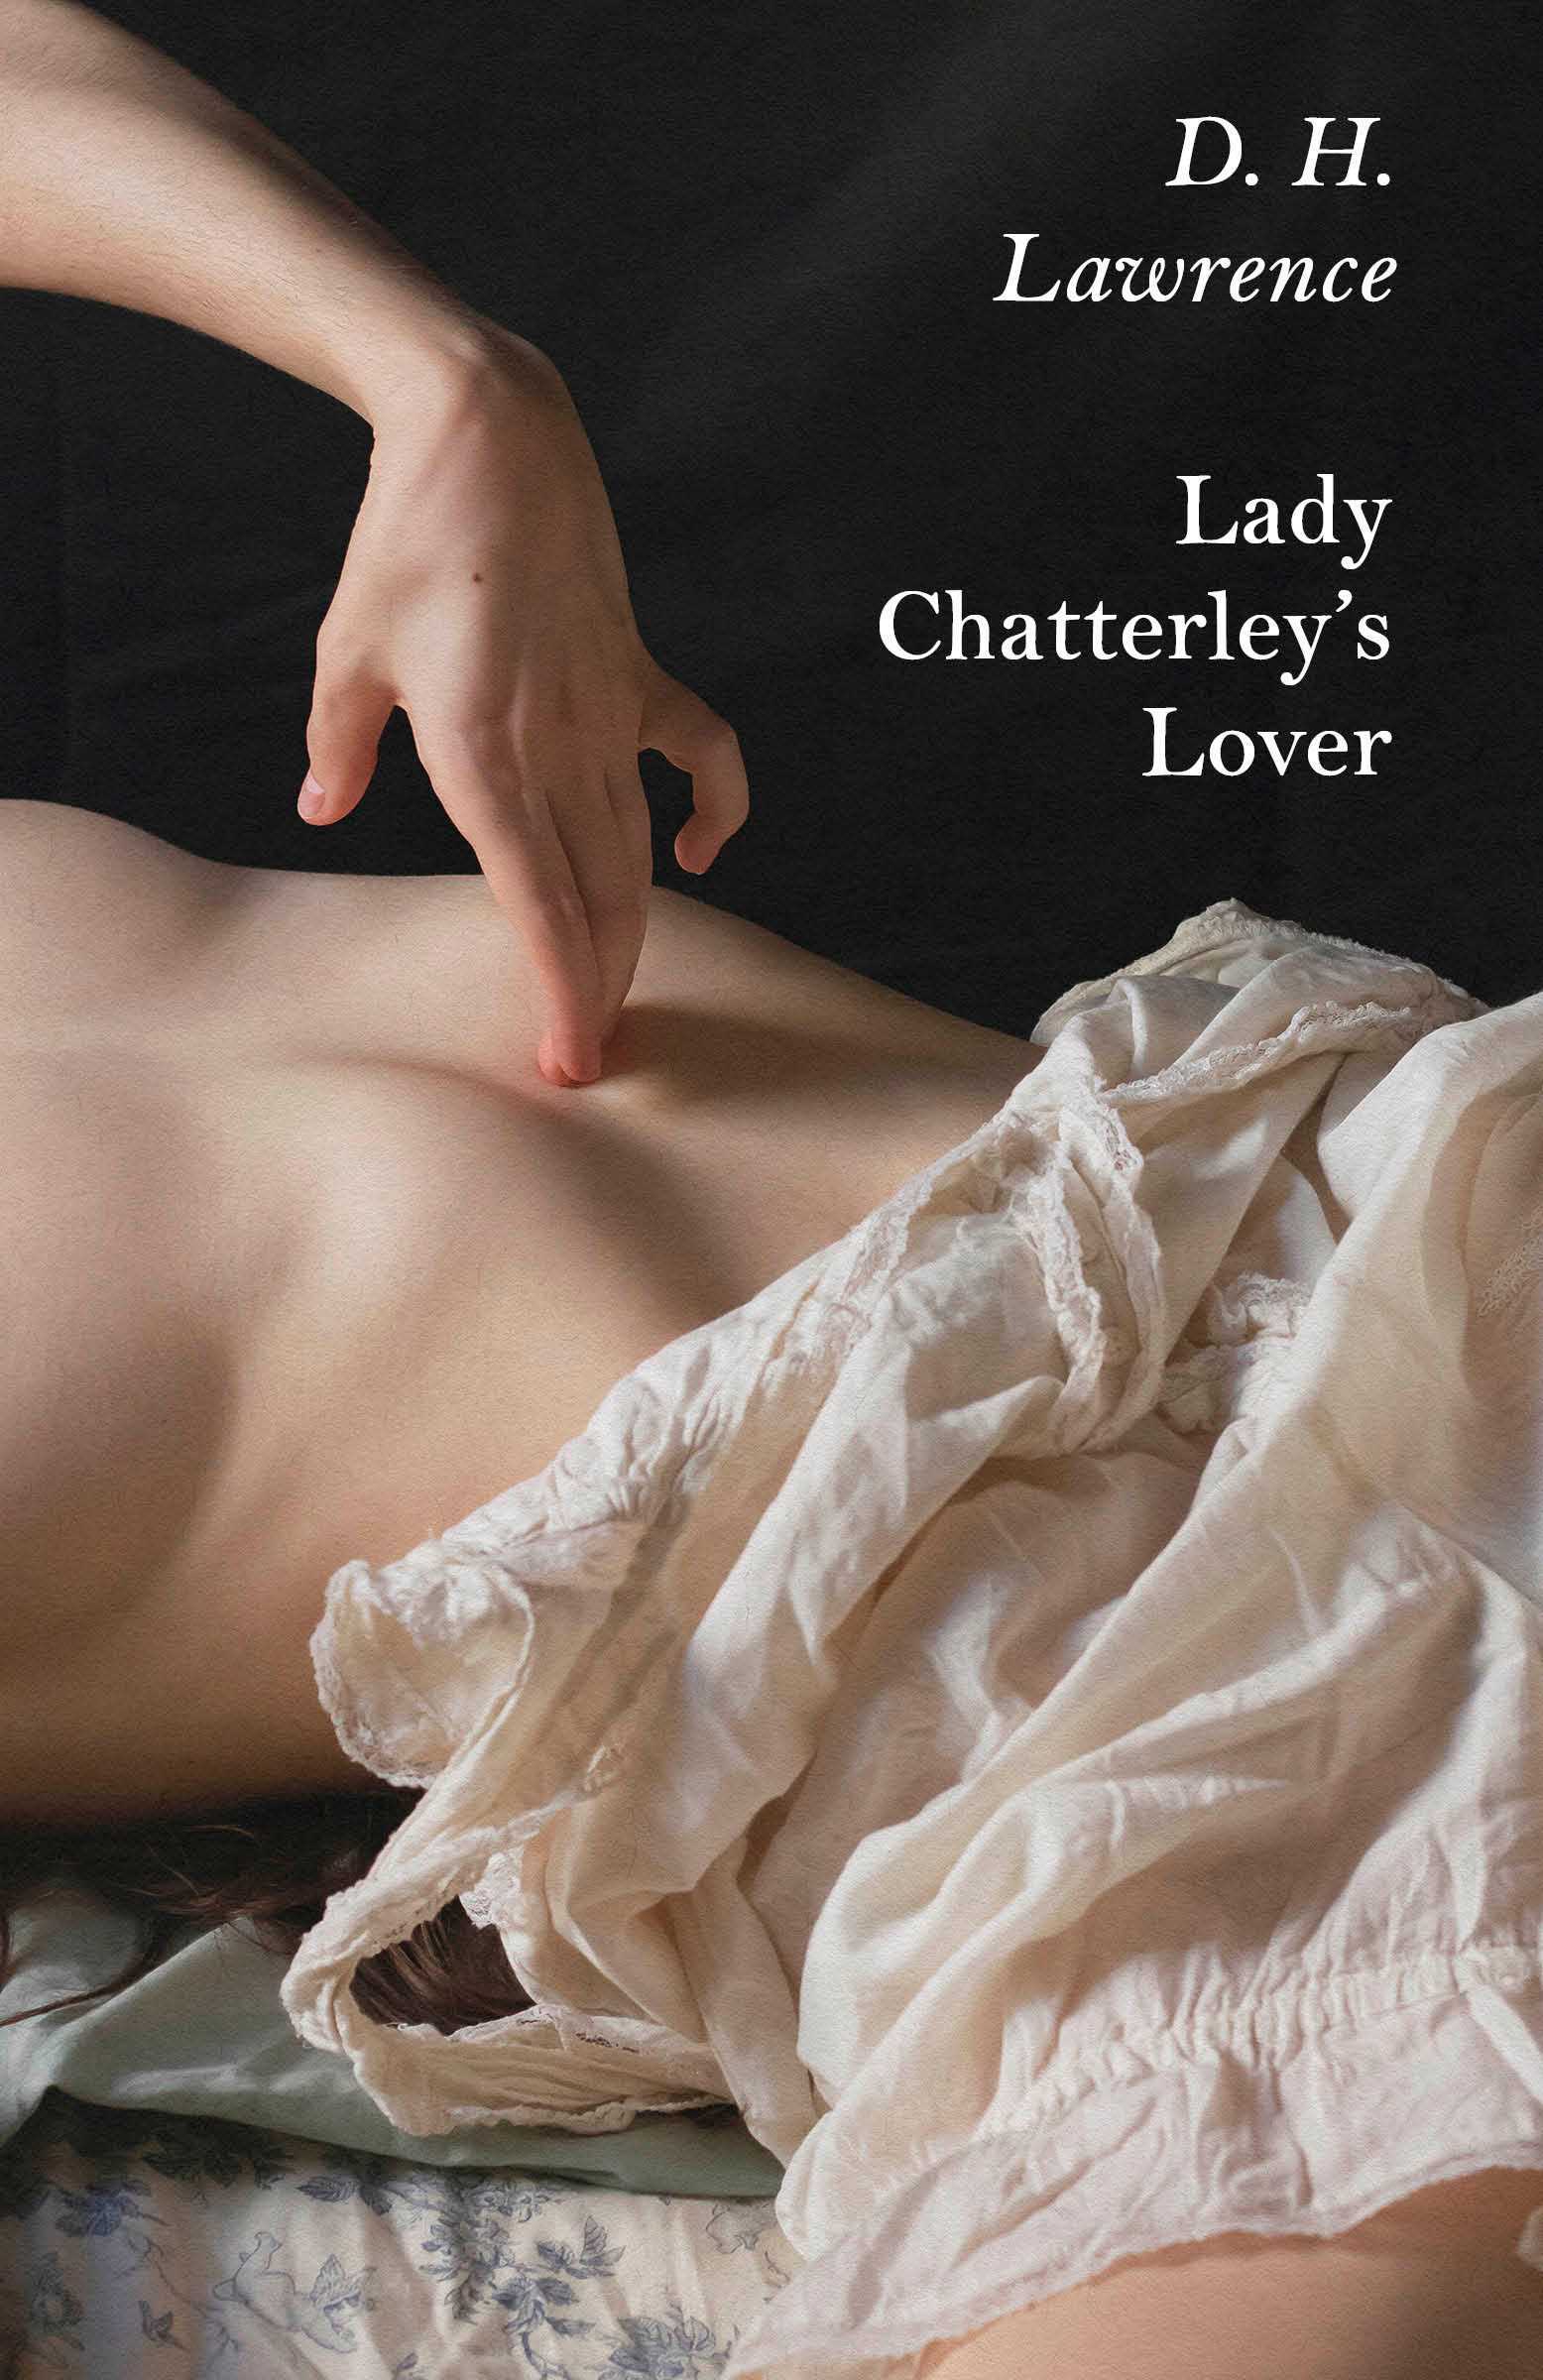 Lady Chatterley's Lover (Vintage Classics)